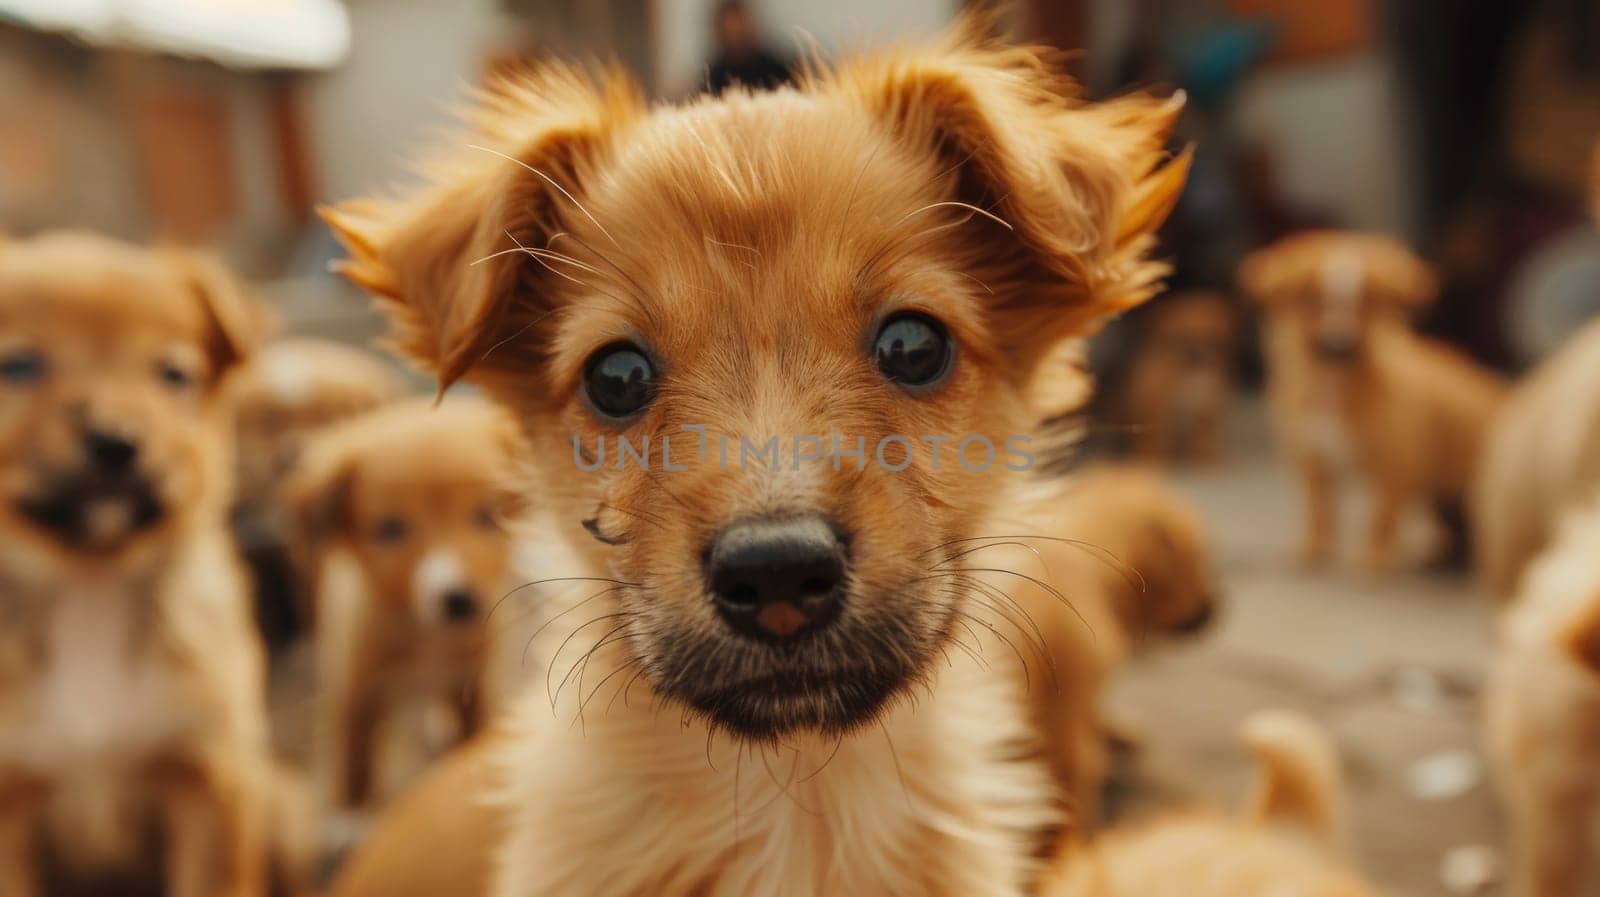 A close up of a brown puppy with big eyes in the middle, AI by starush